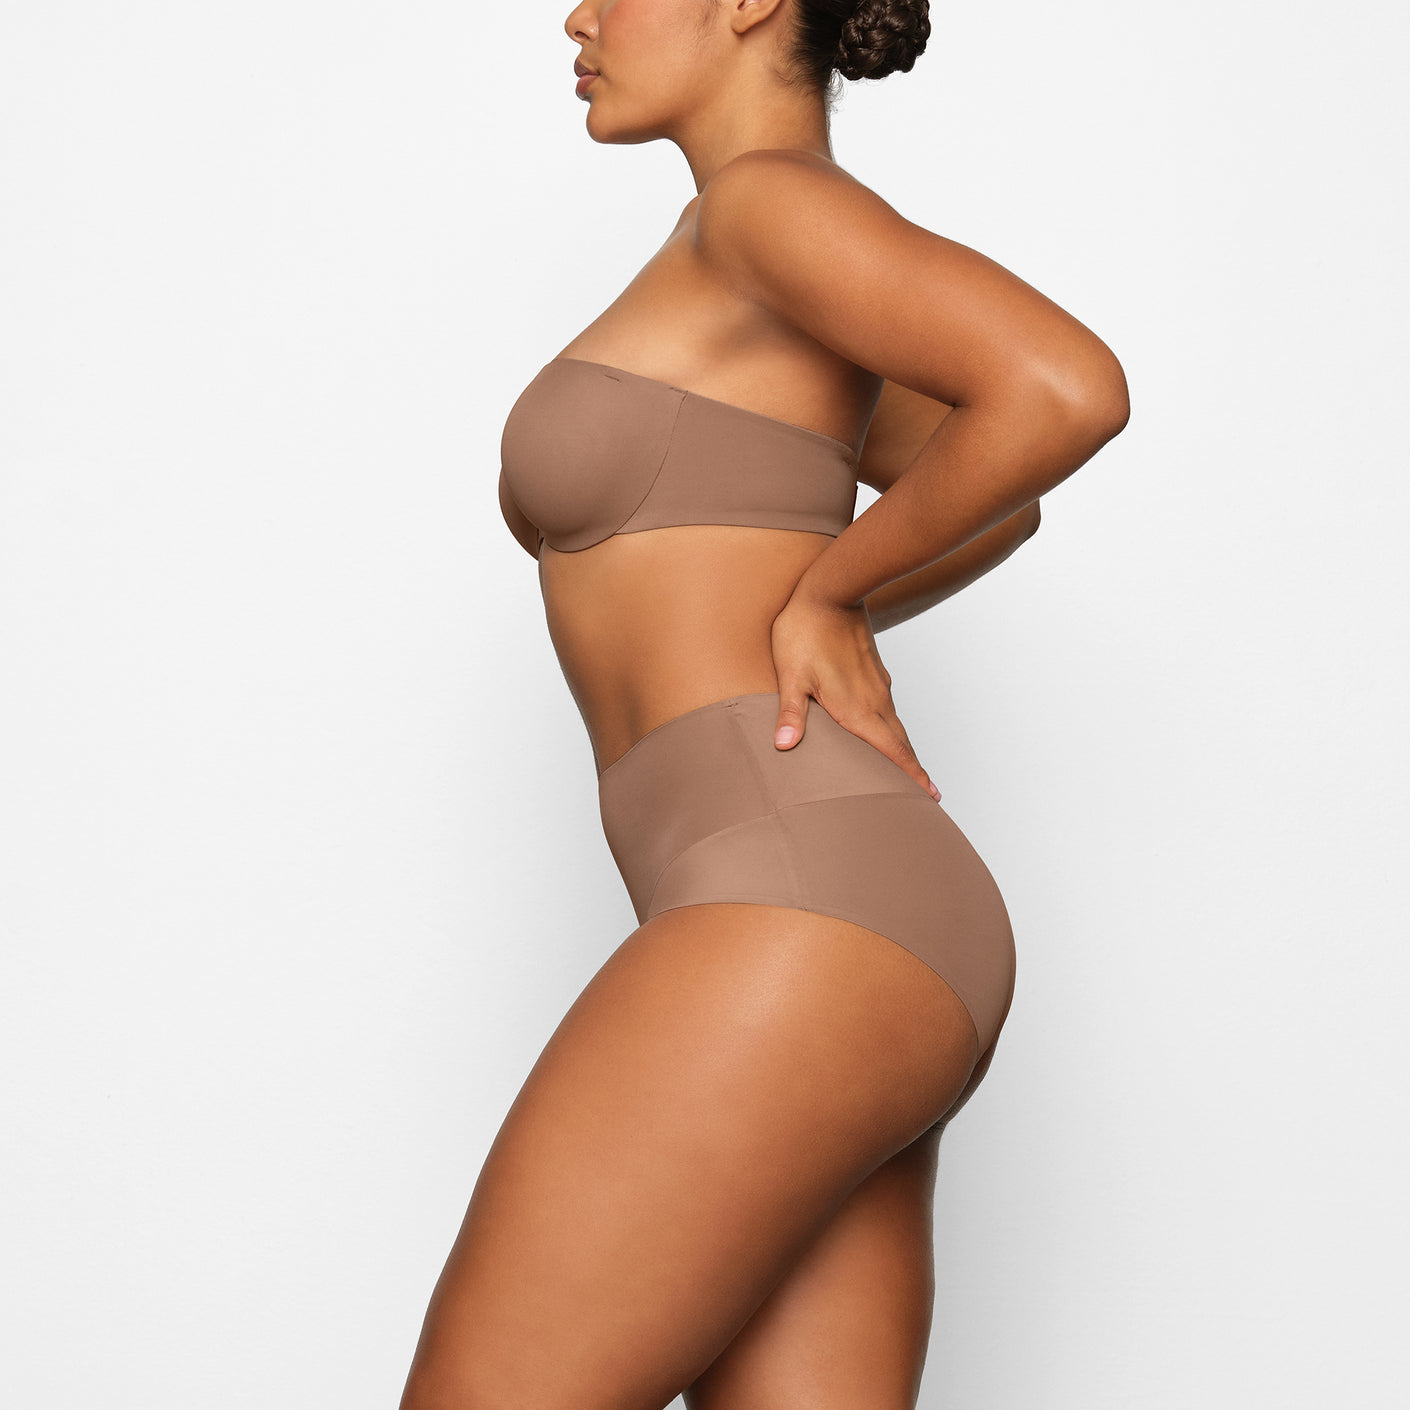 Soma Intimates - Smoothing panties don't just have to be